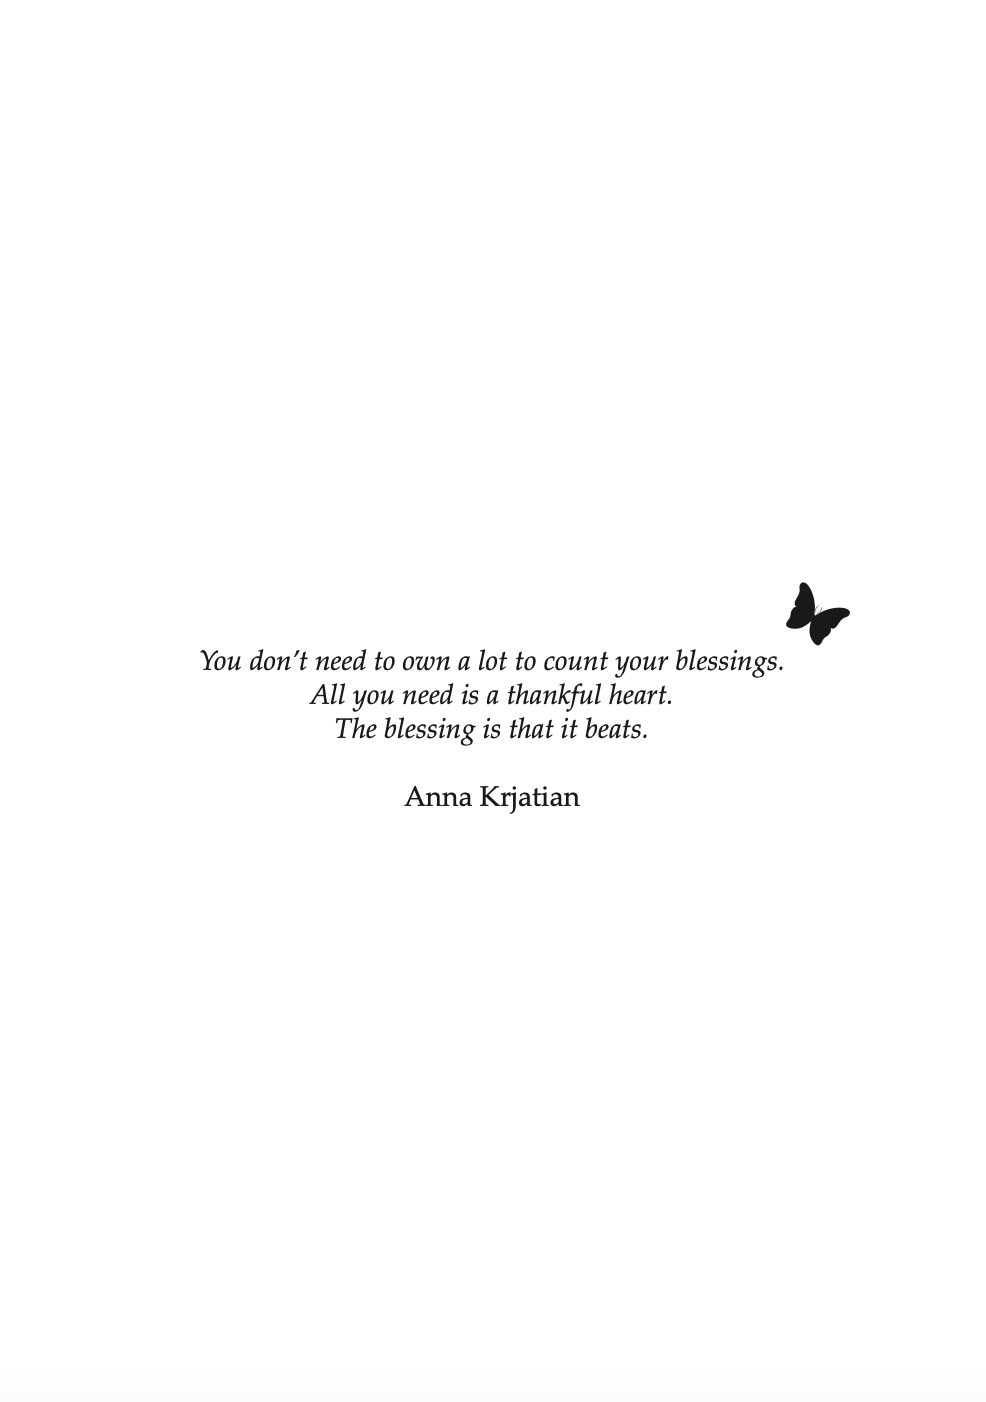 Quote page from inside the book "Unmasking Depression." Quote reads: "You don't need to own a lot to count your blessings. All you need is a thankful heart. The blessing is that it beats." ~ Anna Krjatian and a black butterfly in the corner.